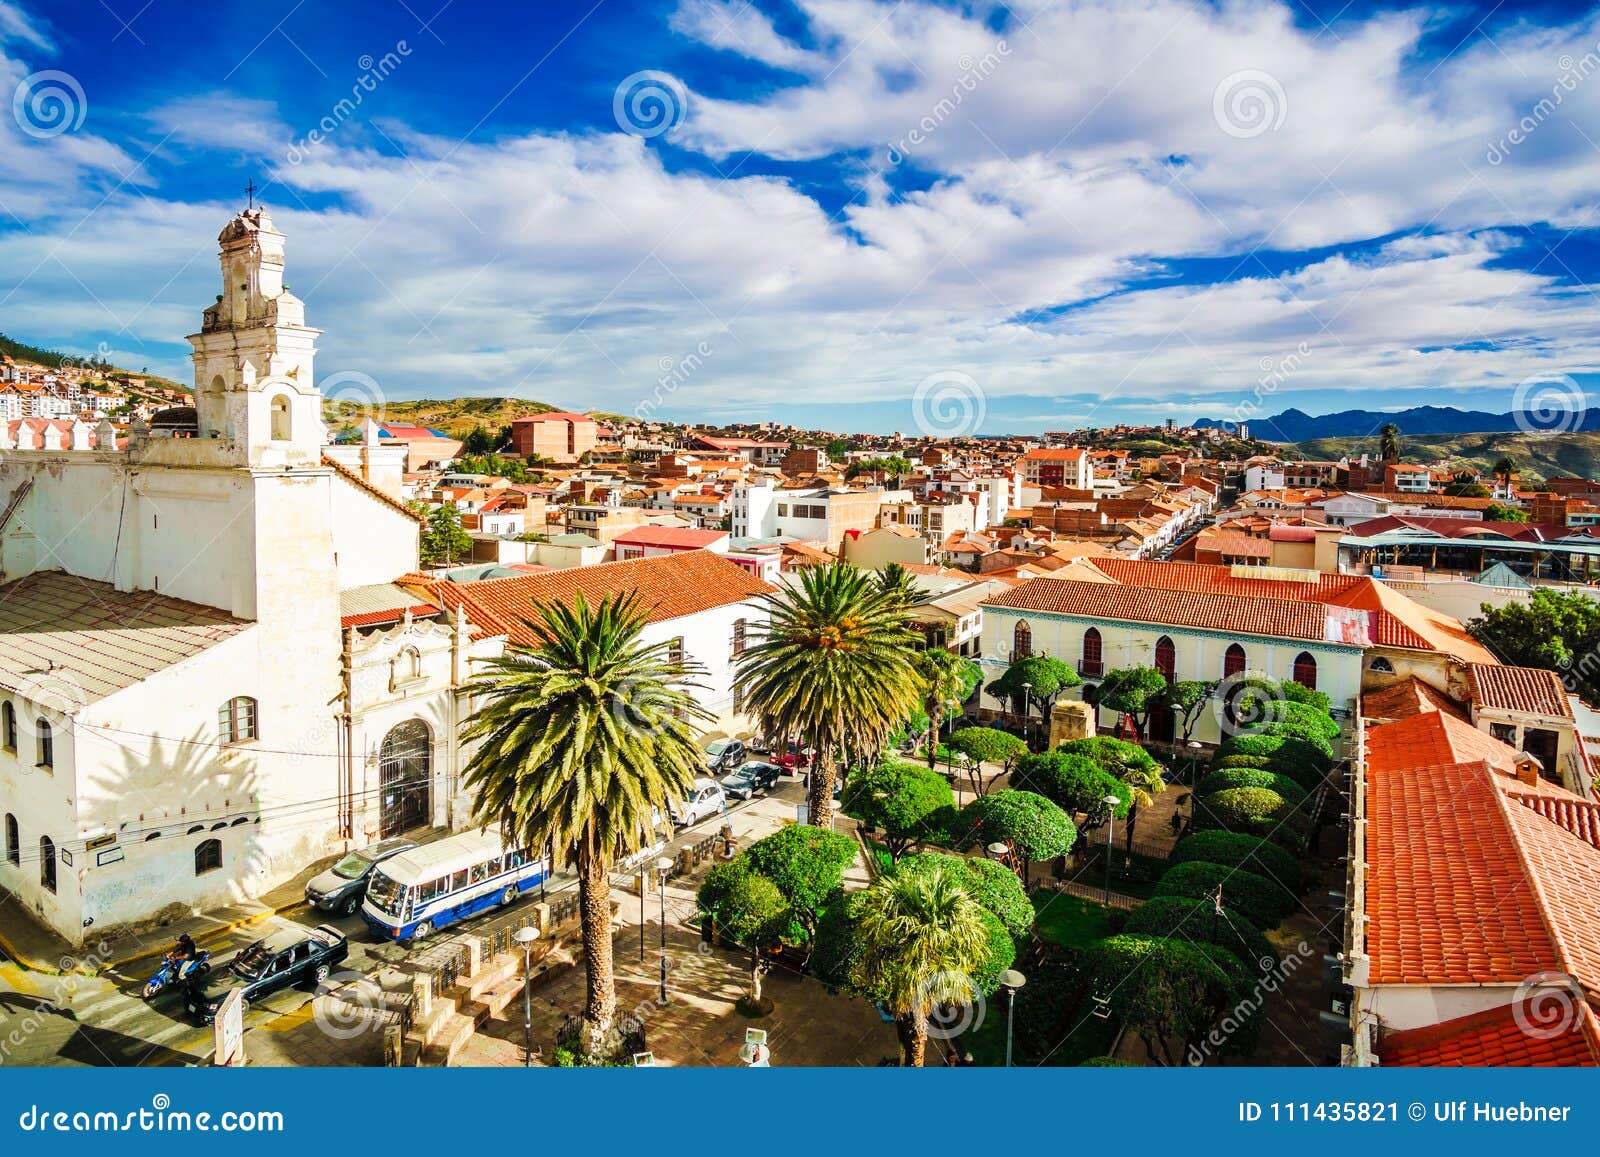 colonial old town of sucre in bolivia